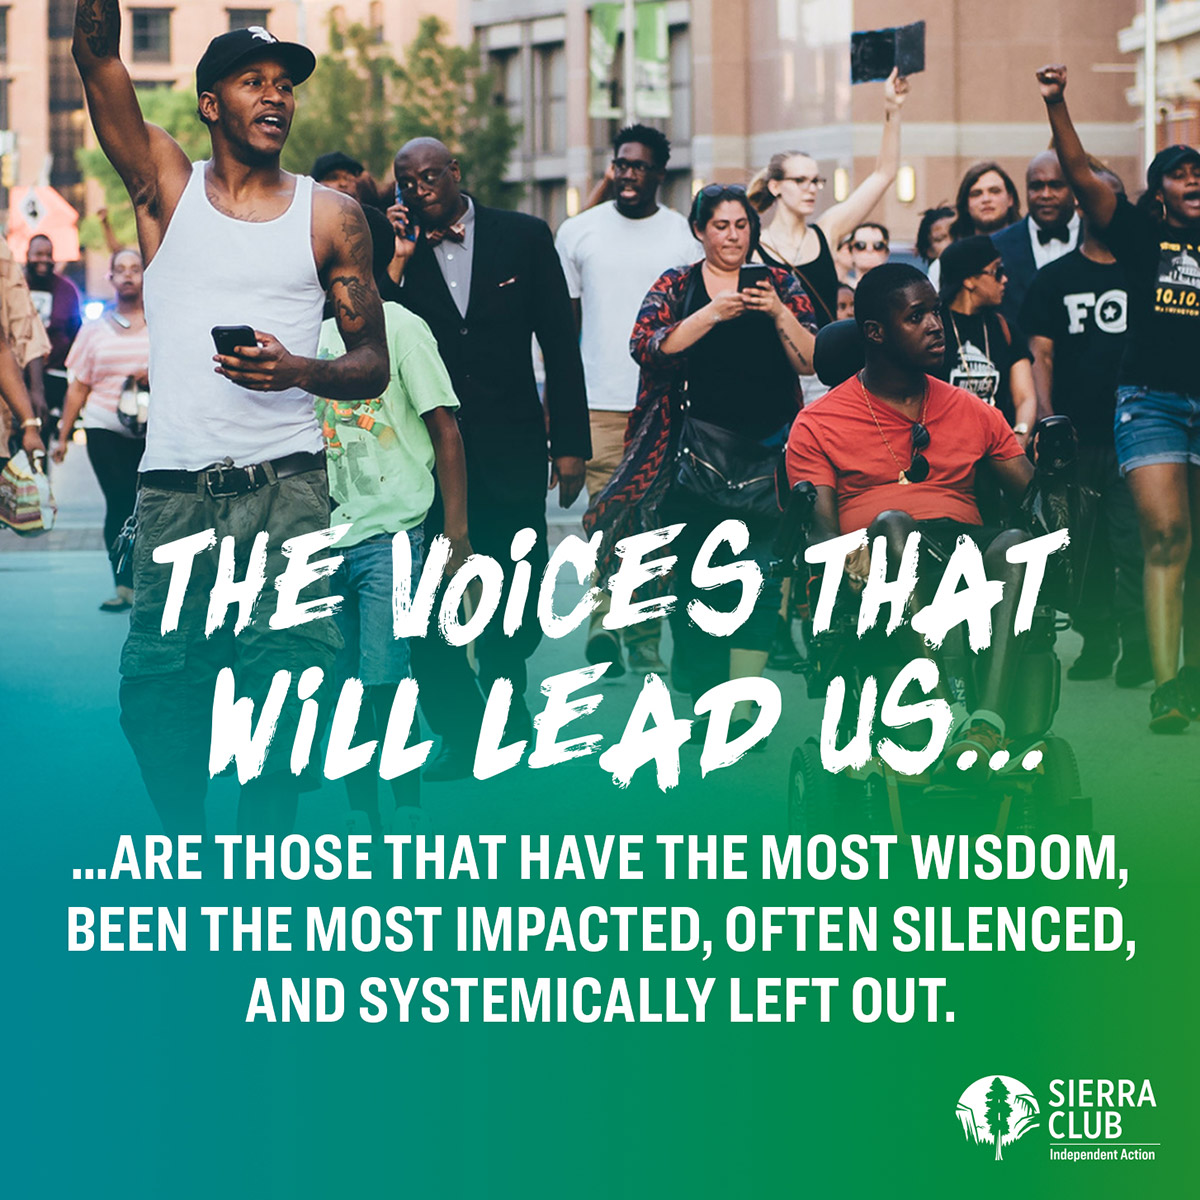 People of color protesting, says "The voices that will lead us are those that have the most wisdom, been the most impacted, often silenced, and systematically left out."